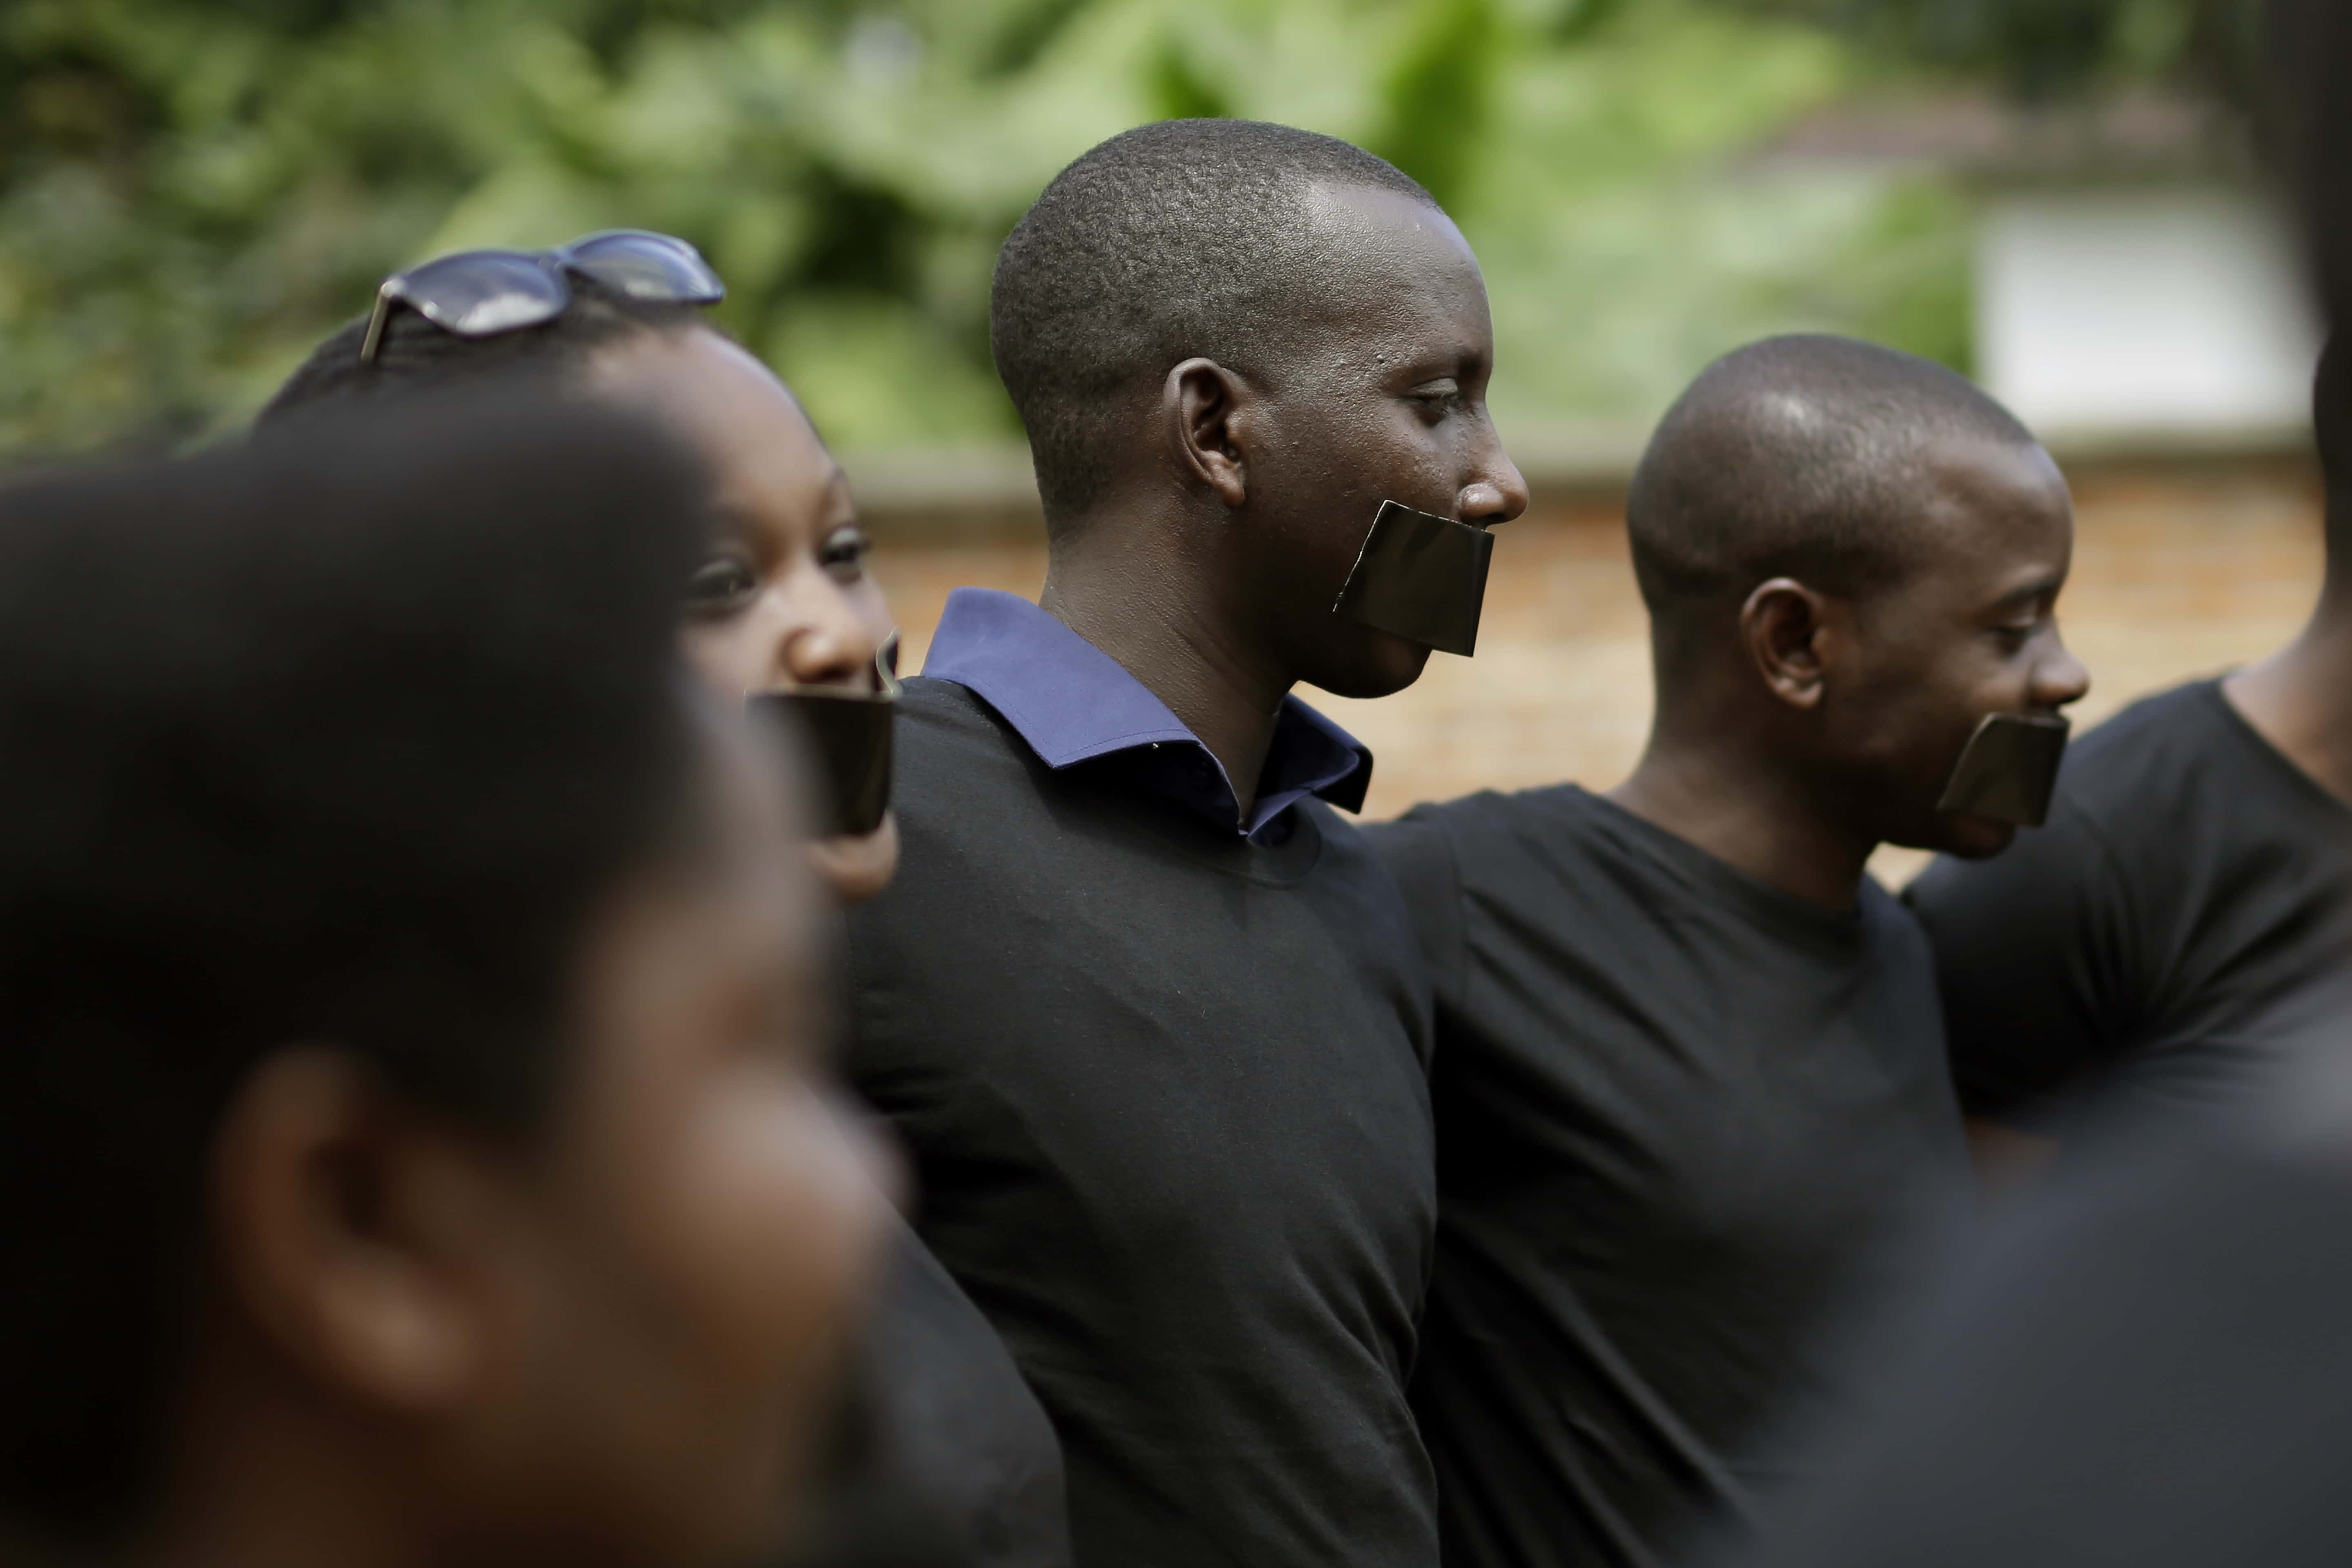 Journalists with tape on their mouths gather on the occasion of World Press Freedom Day, in Bujumbura, Burundi, 3 May 2015, AP Photo/Jerome Delay